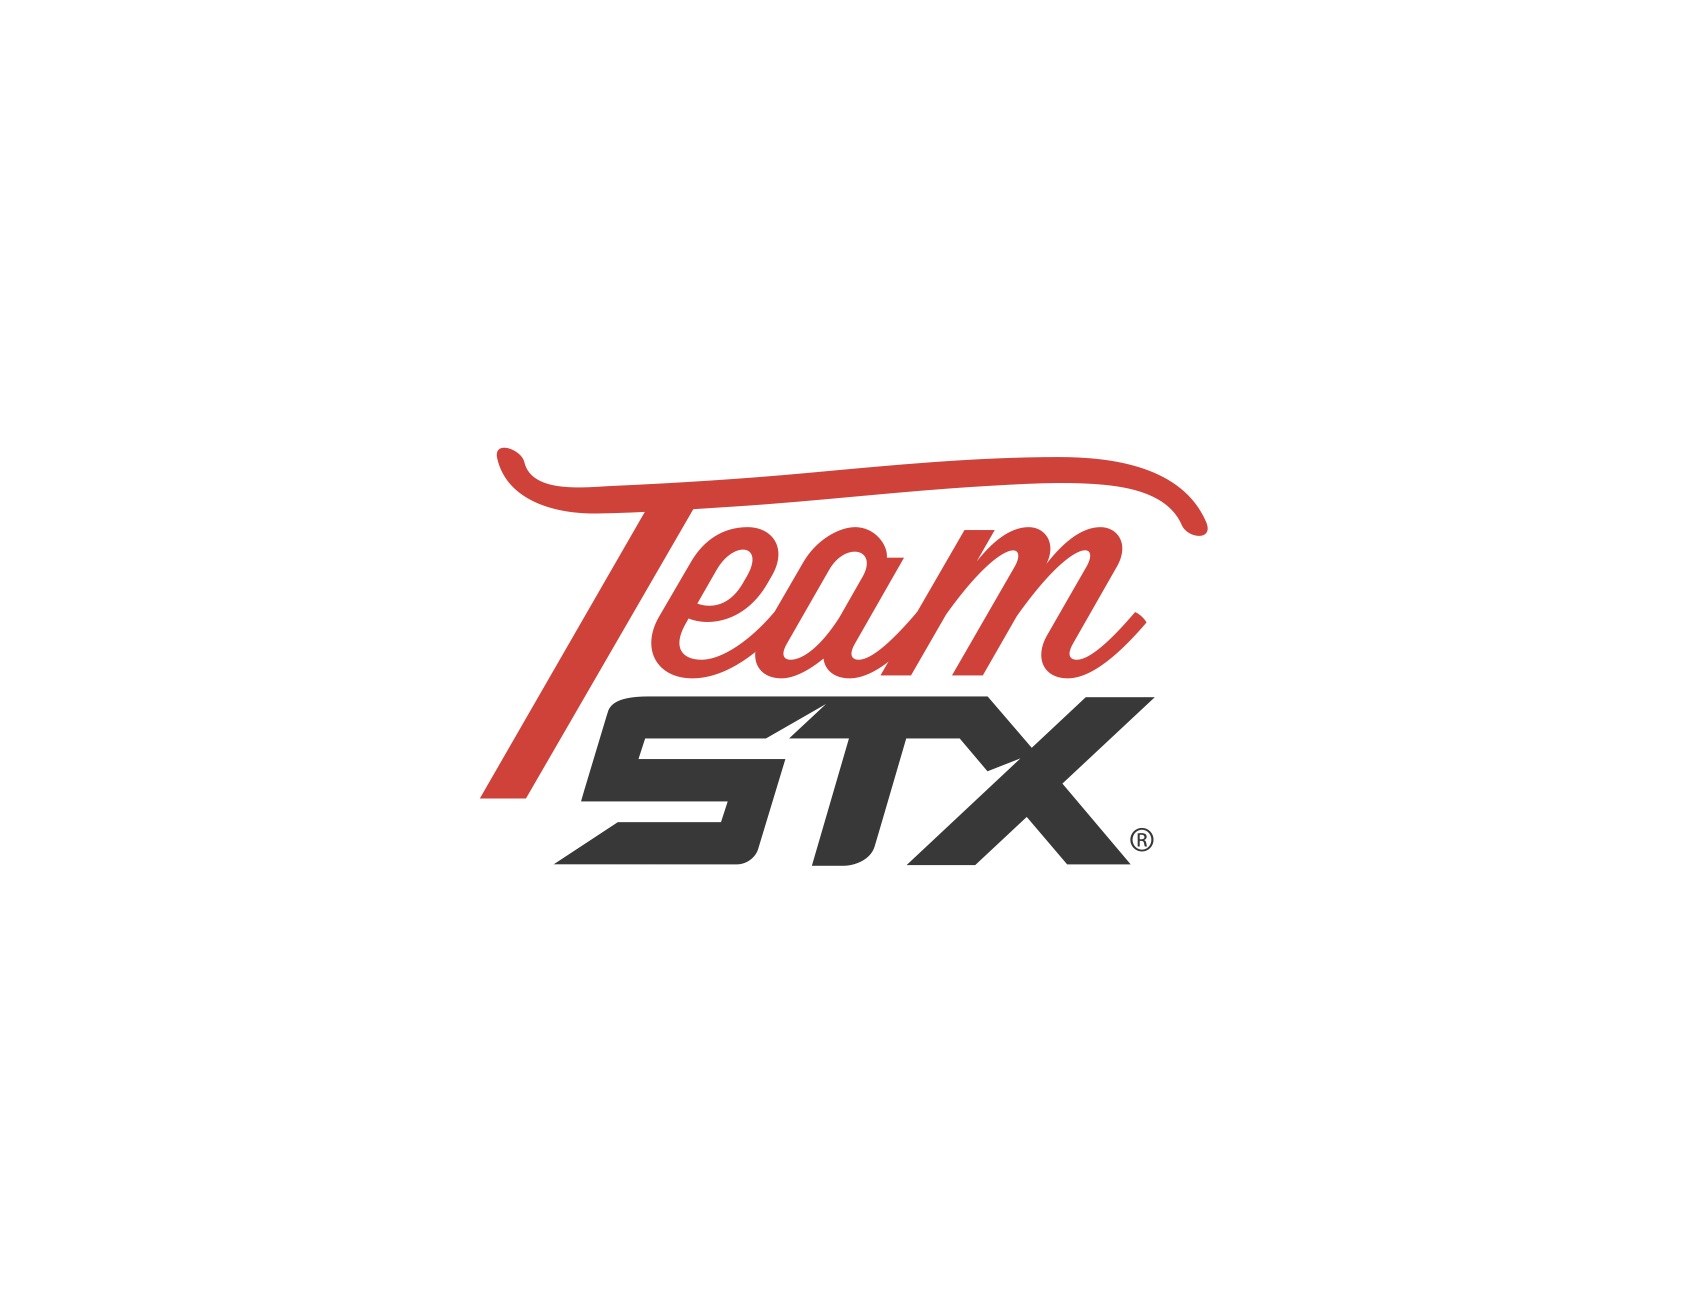 Barnes, an assistant coach at Saint Joseph’s University, will compete with Team STX in women’s tournaments this summer and take part in youth clinics led by Team STX.